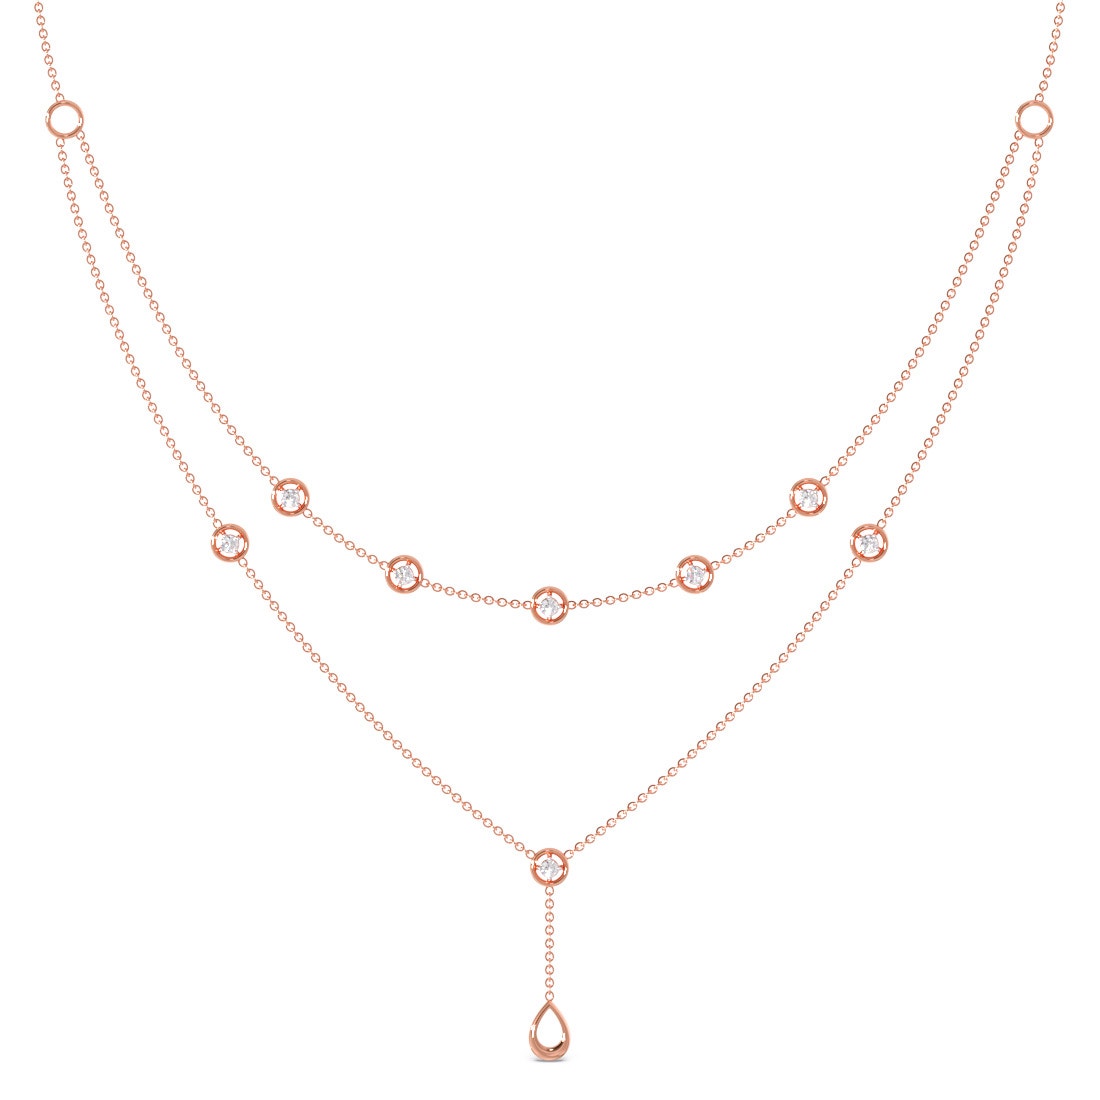 Station Necklace with 0.15 Carat TW of Diamonds in 10kt Yellow Gold